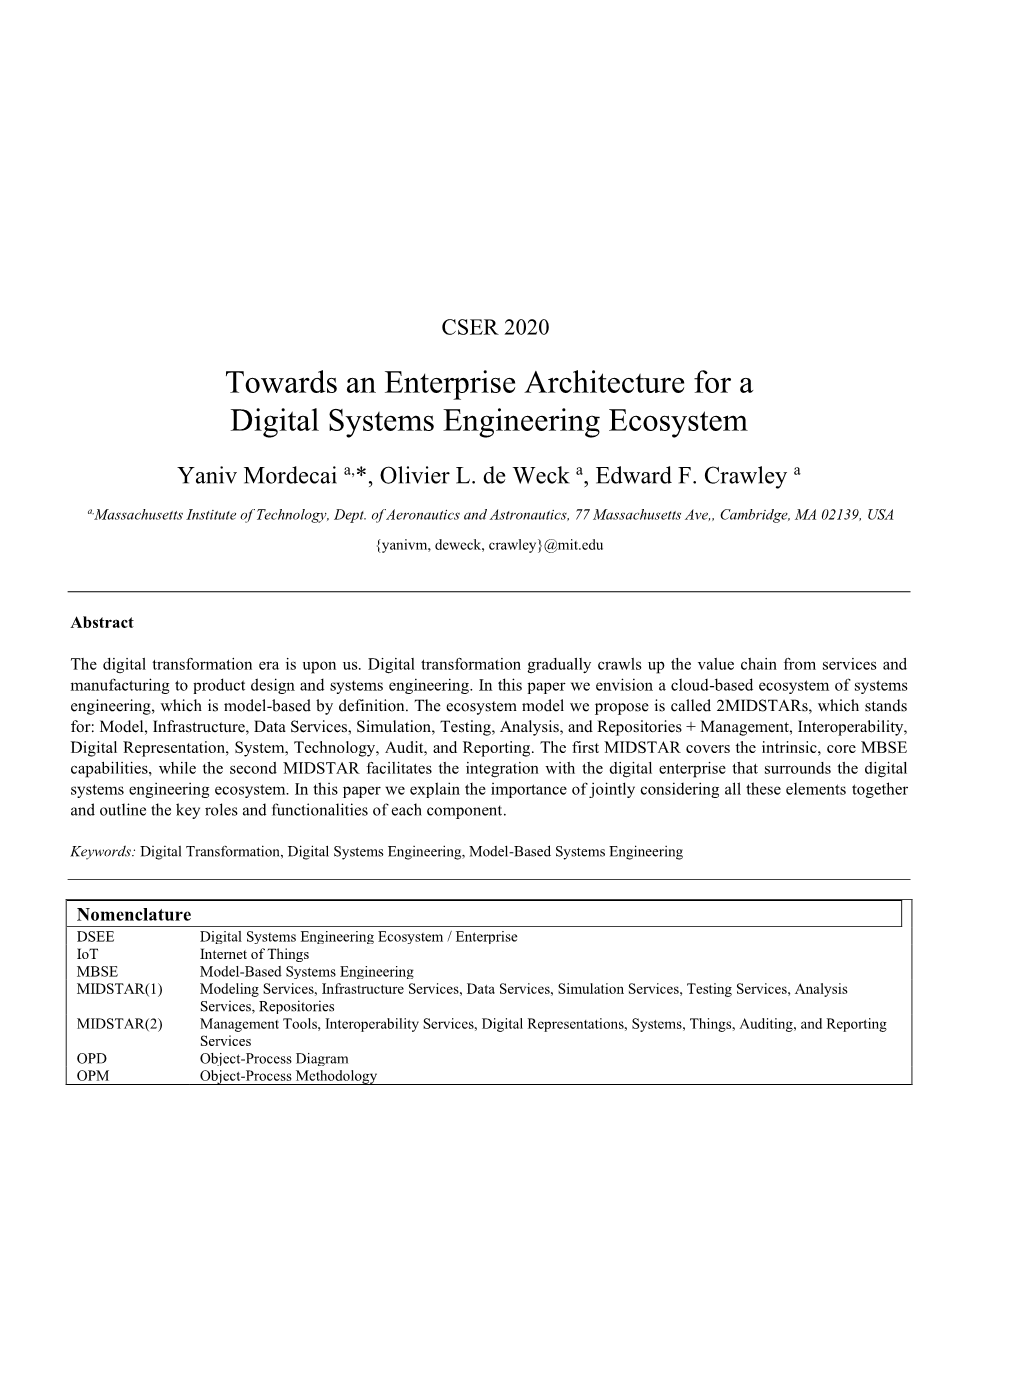 Towards an Enterprise Architecture for Digital Systems Engineering